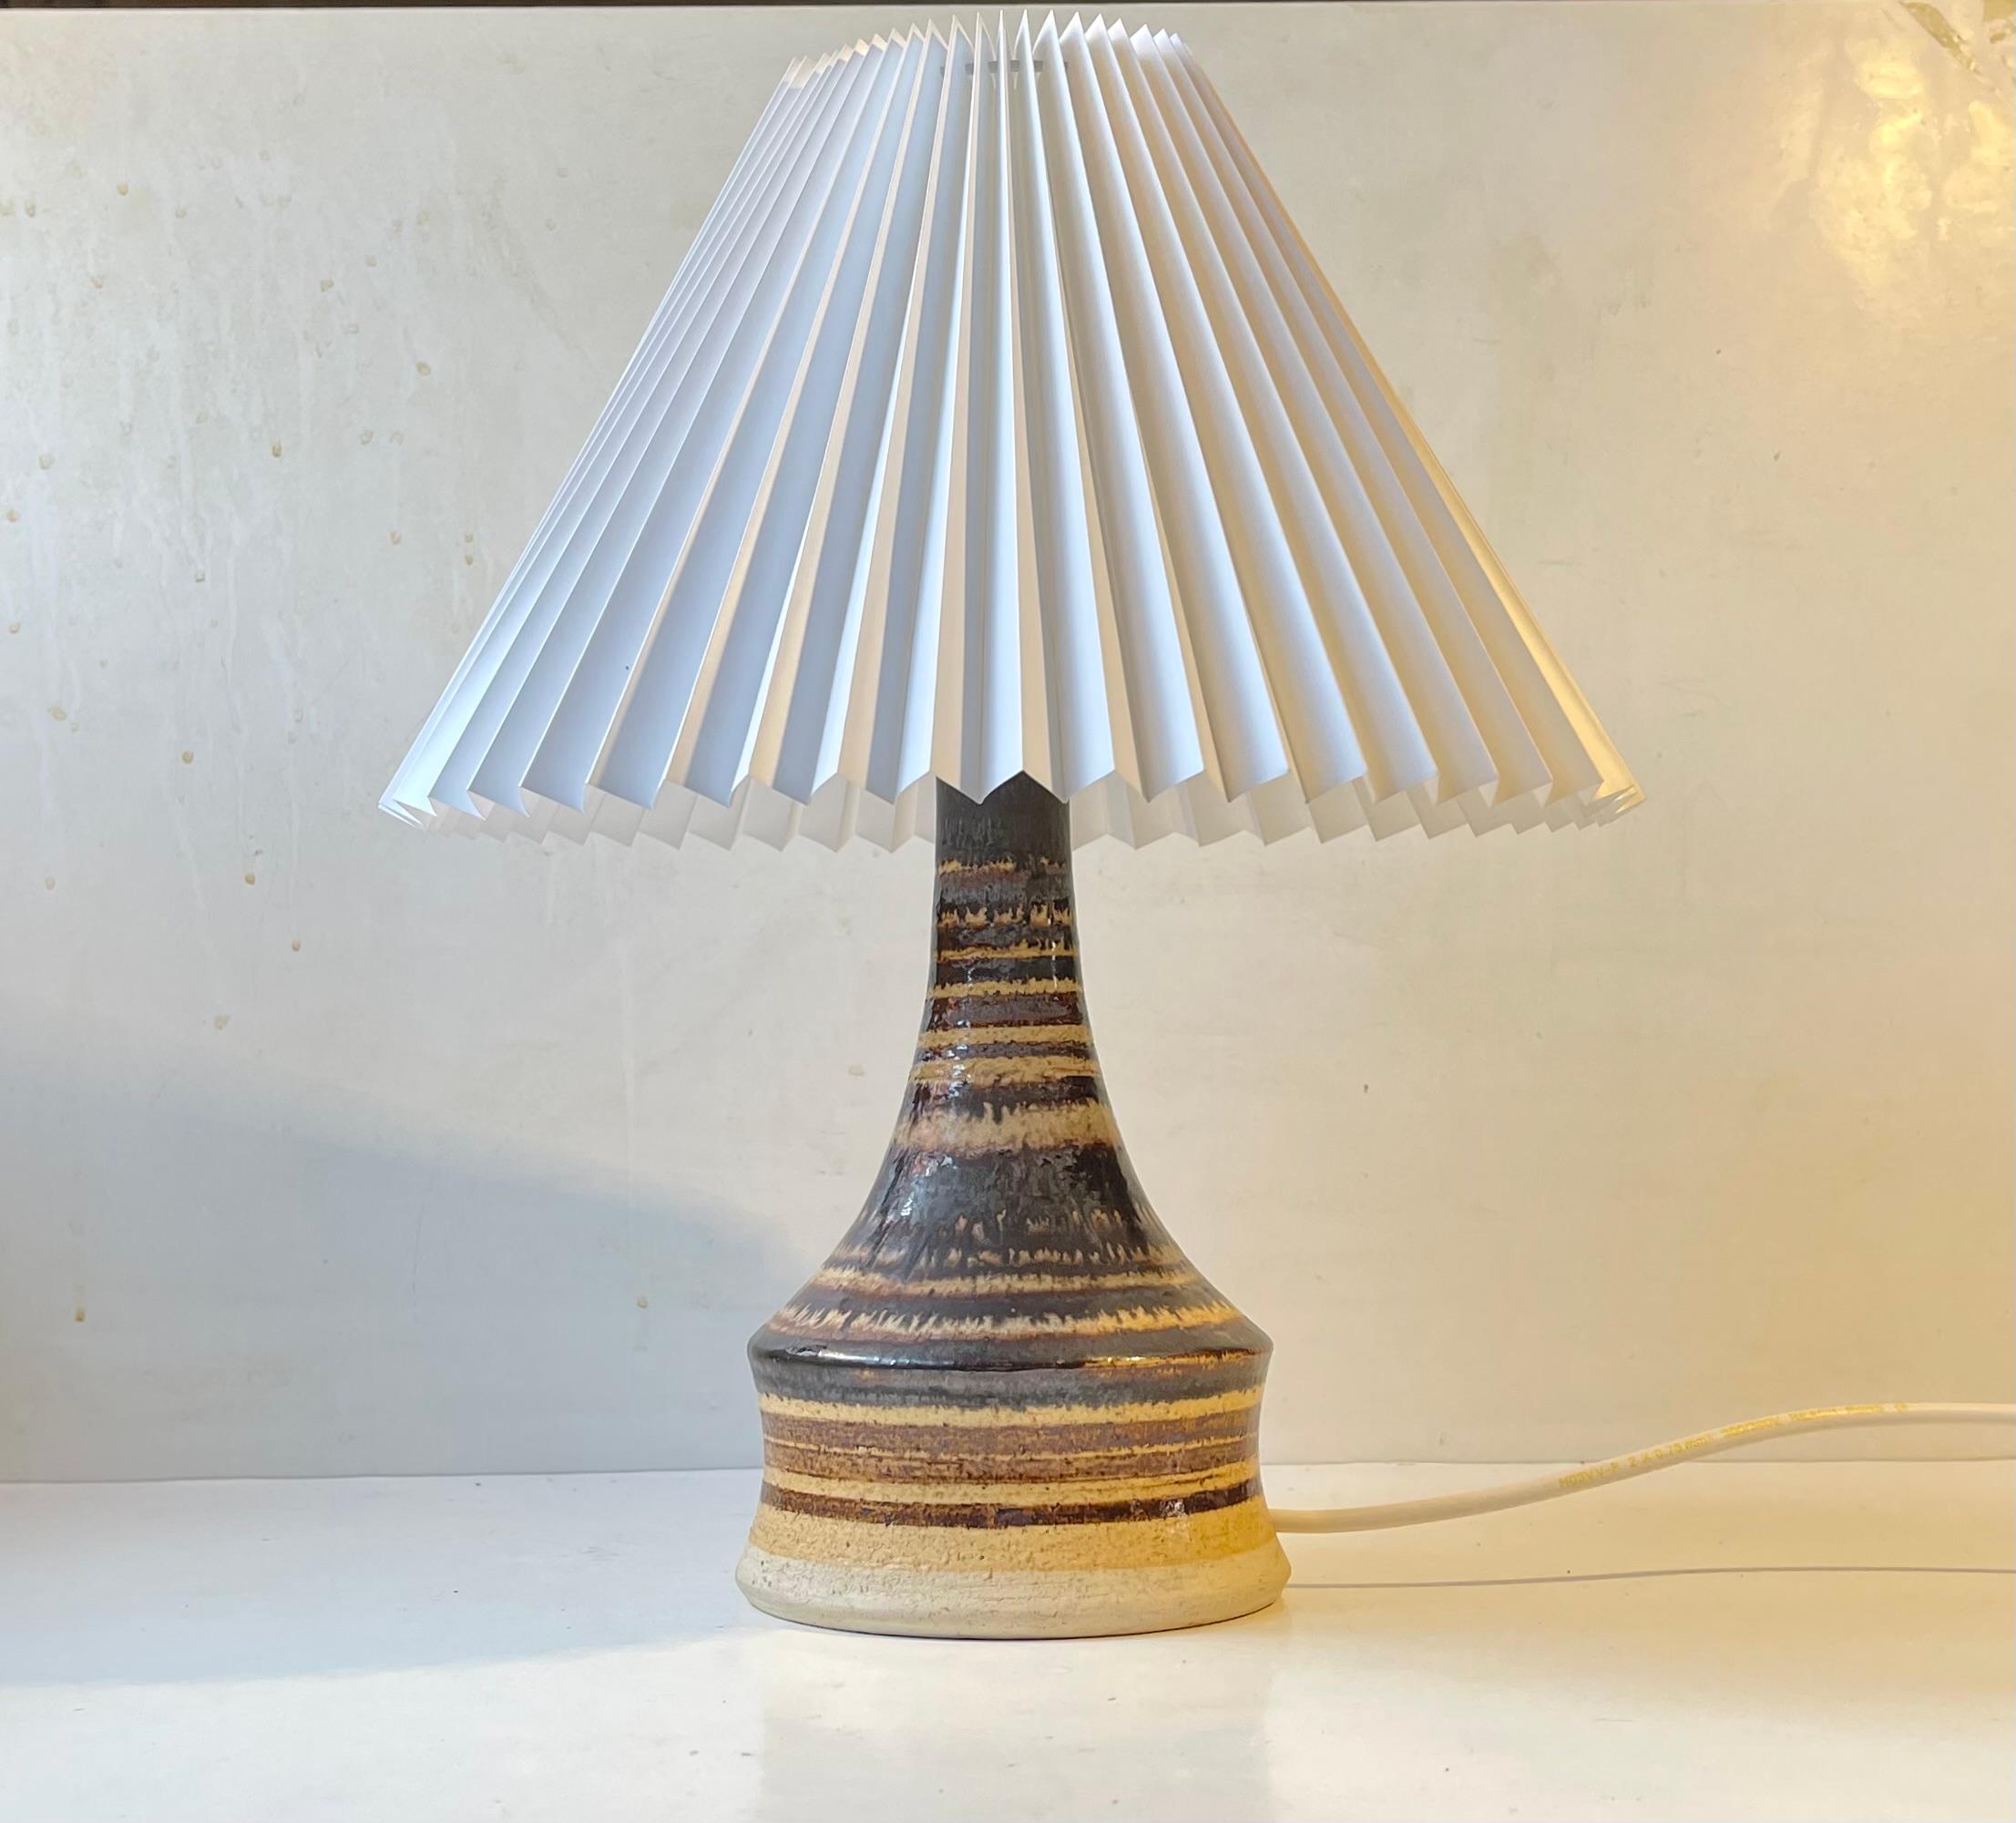 Italian ceramic table light decorated with stripes in earthy glazes. It has no markings besides a handwritten Italy to its inside. Stylistically it is very similar to lamps by Danish Tue Poulsen and Einar Johansen. It is mounted with a new white